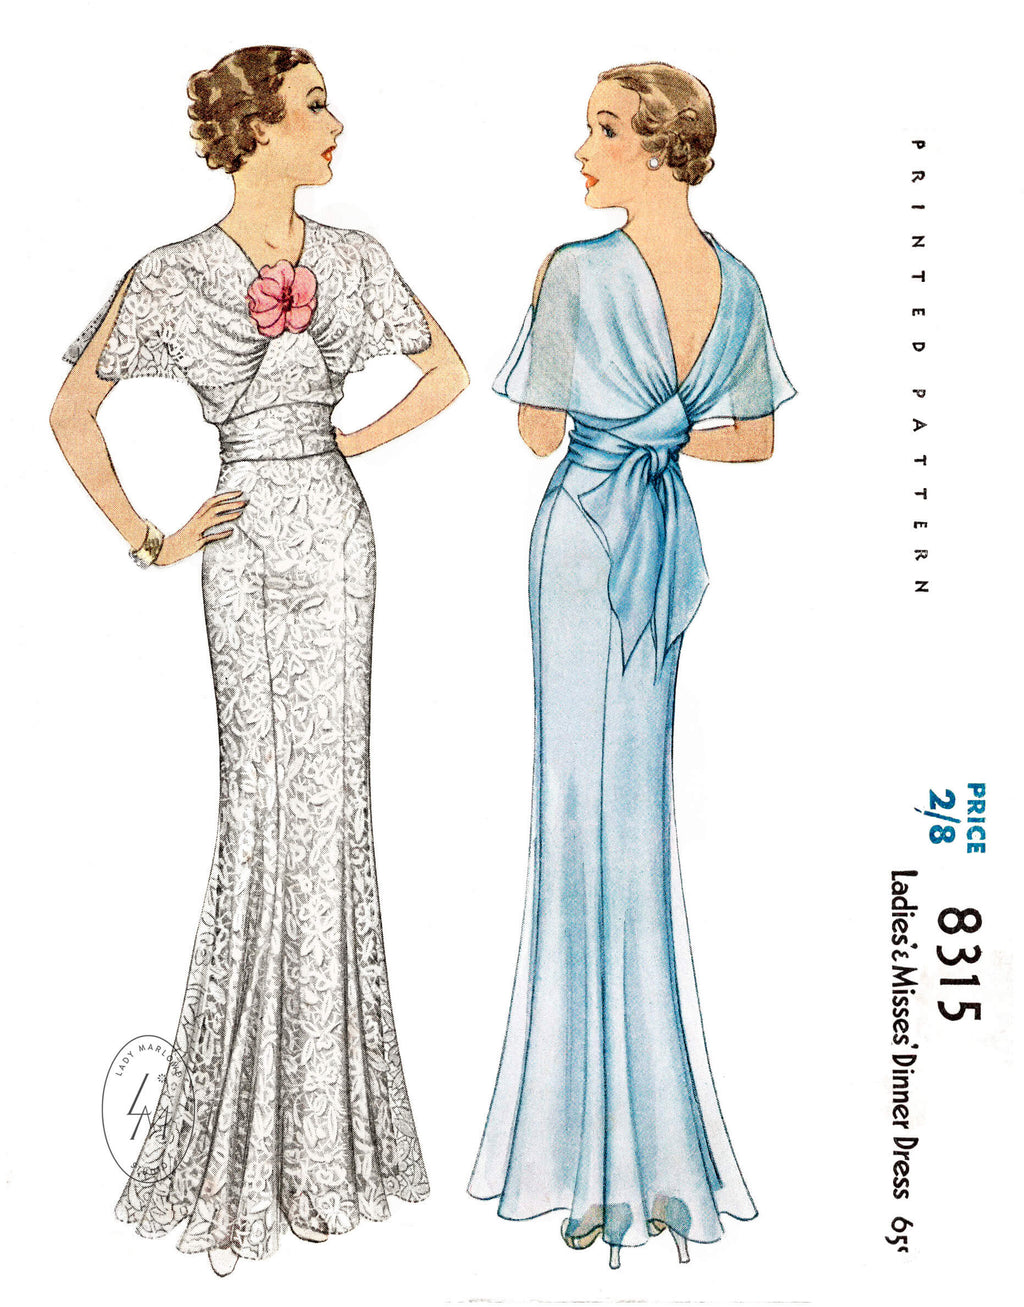 McCall 8315 1930s 1935 evening gown bridal wedding dress vintage sewing pattern reproduction